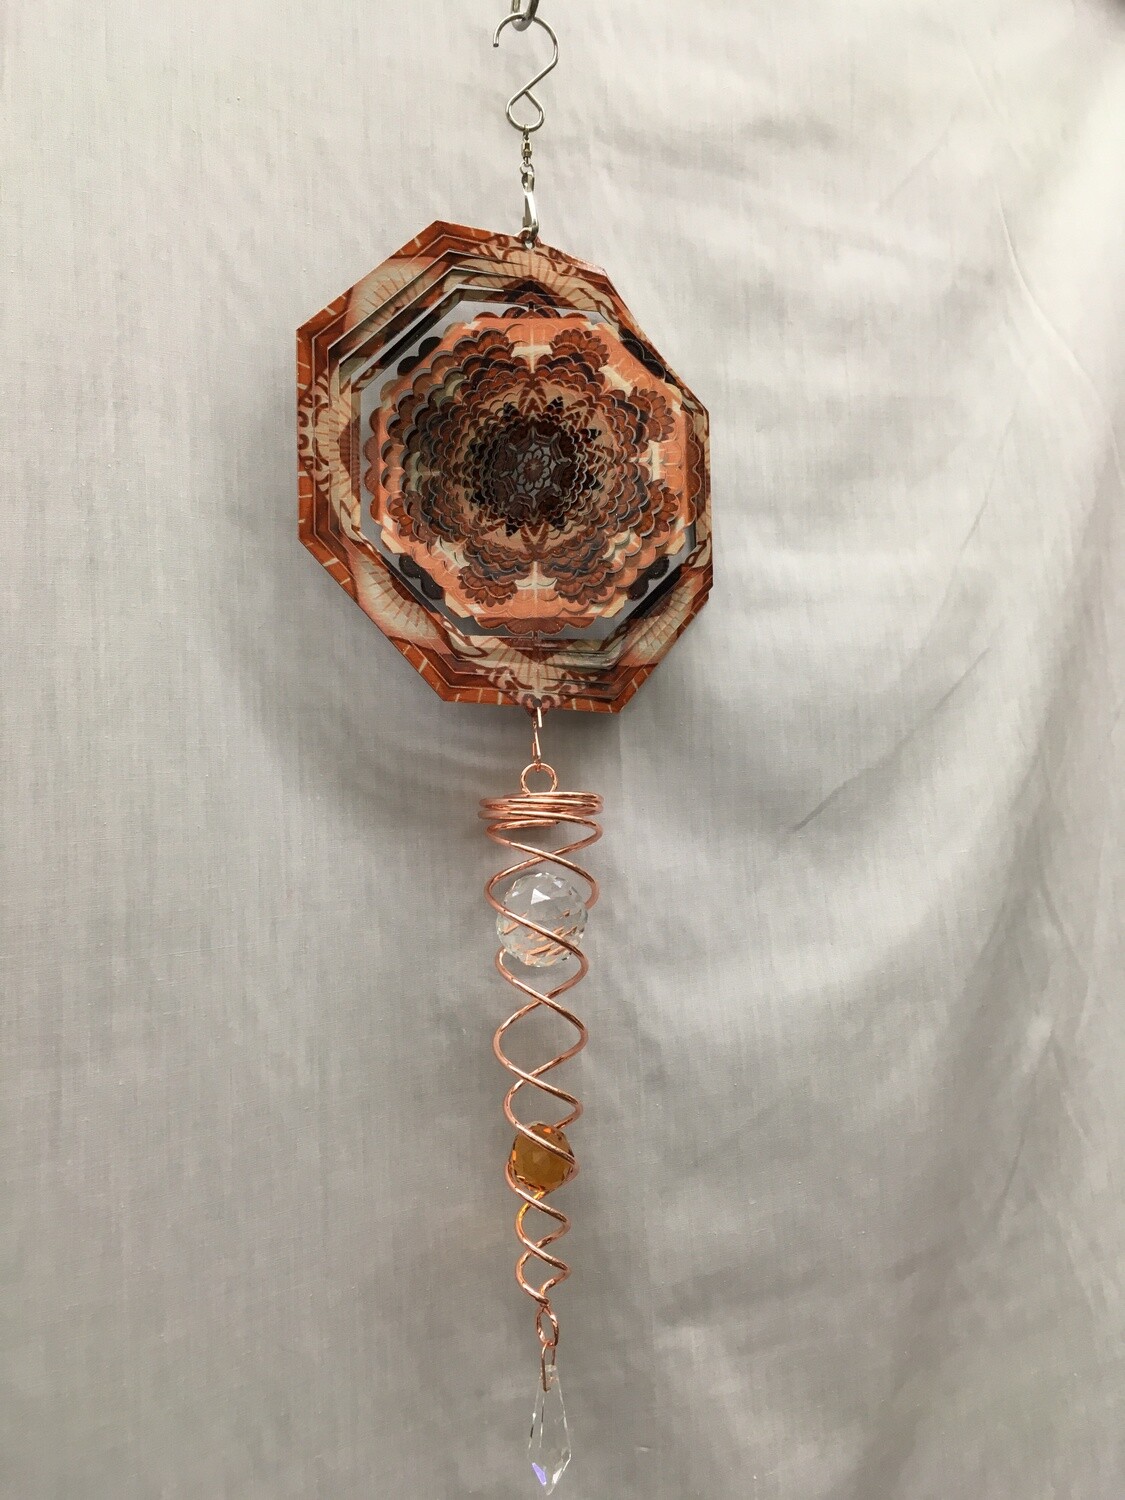 Spinner Set - Copper Mandala Small Wind Spinner with Twister Spiral double crystal Tail